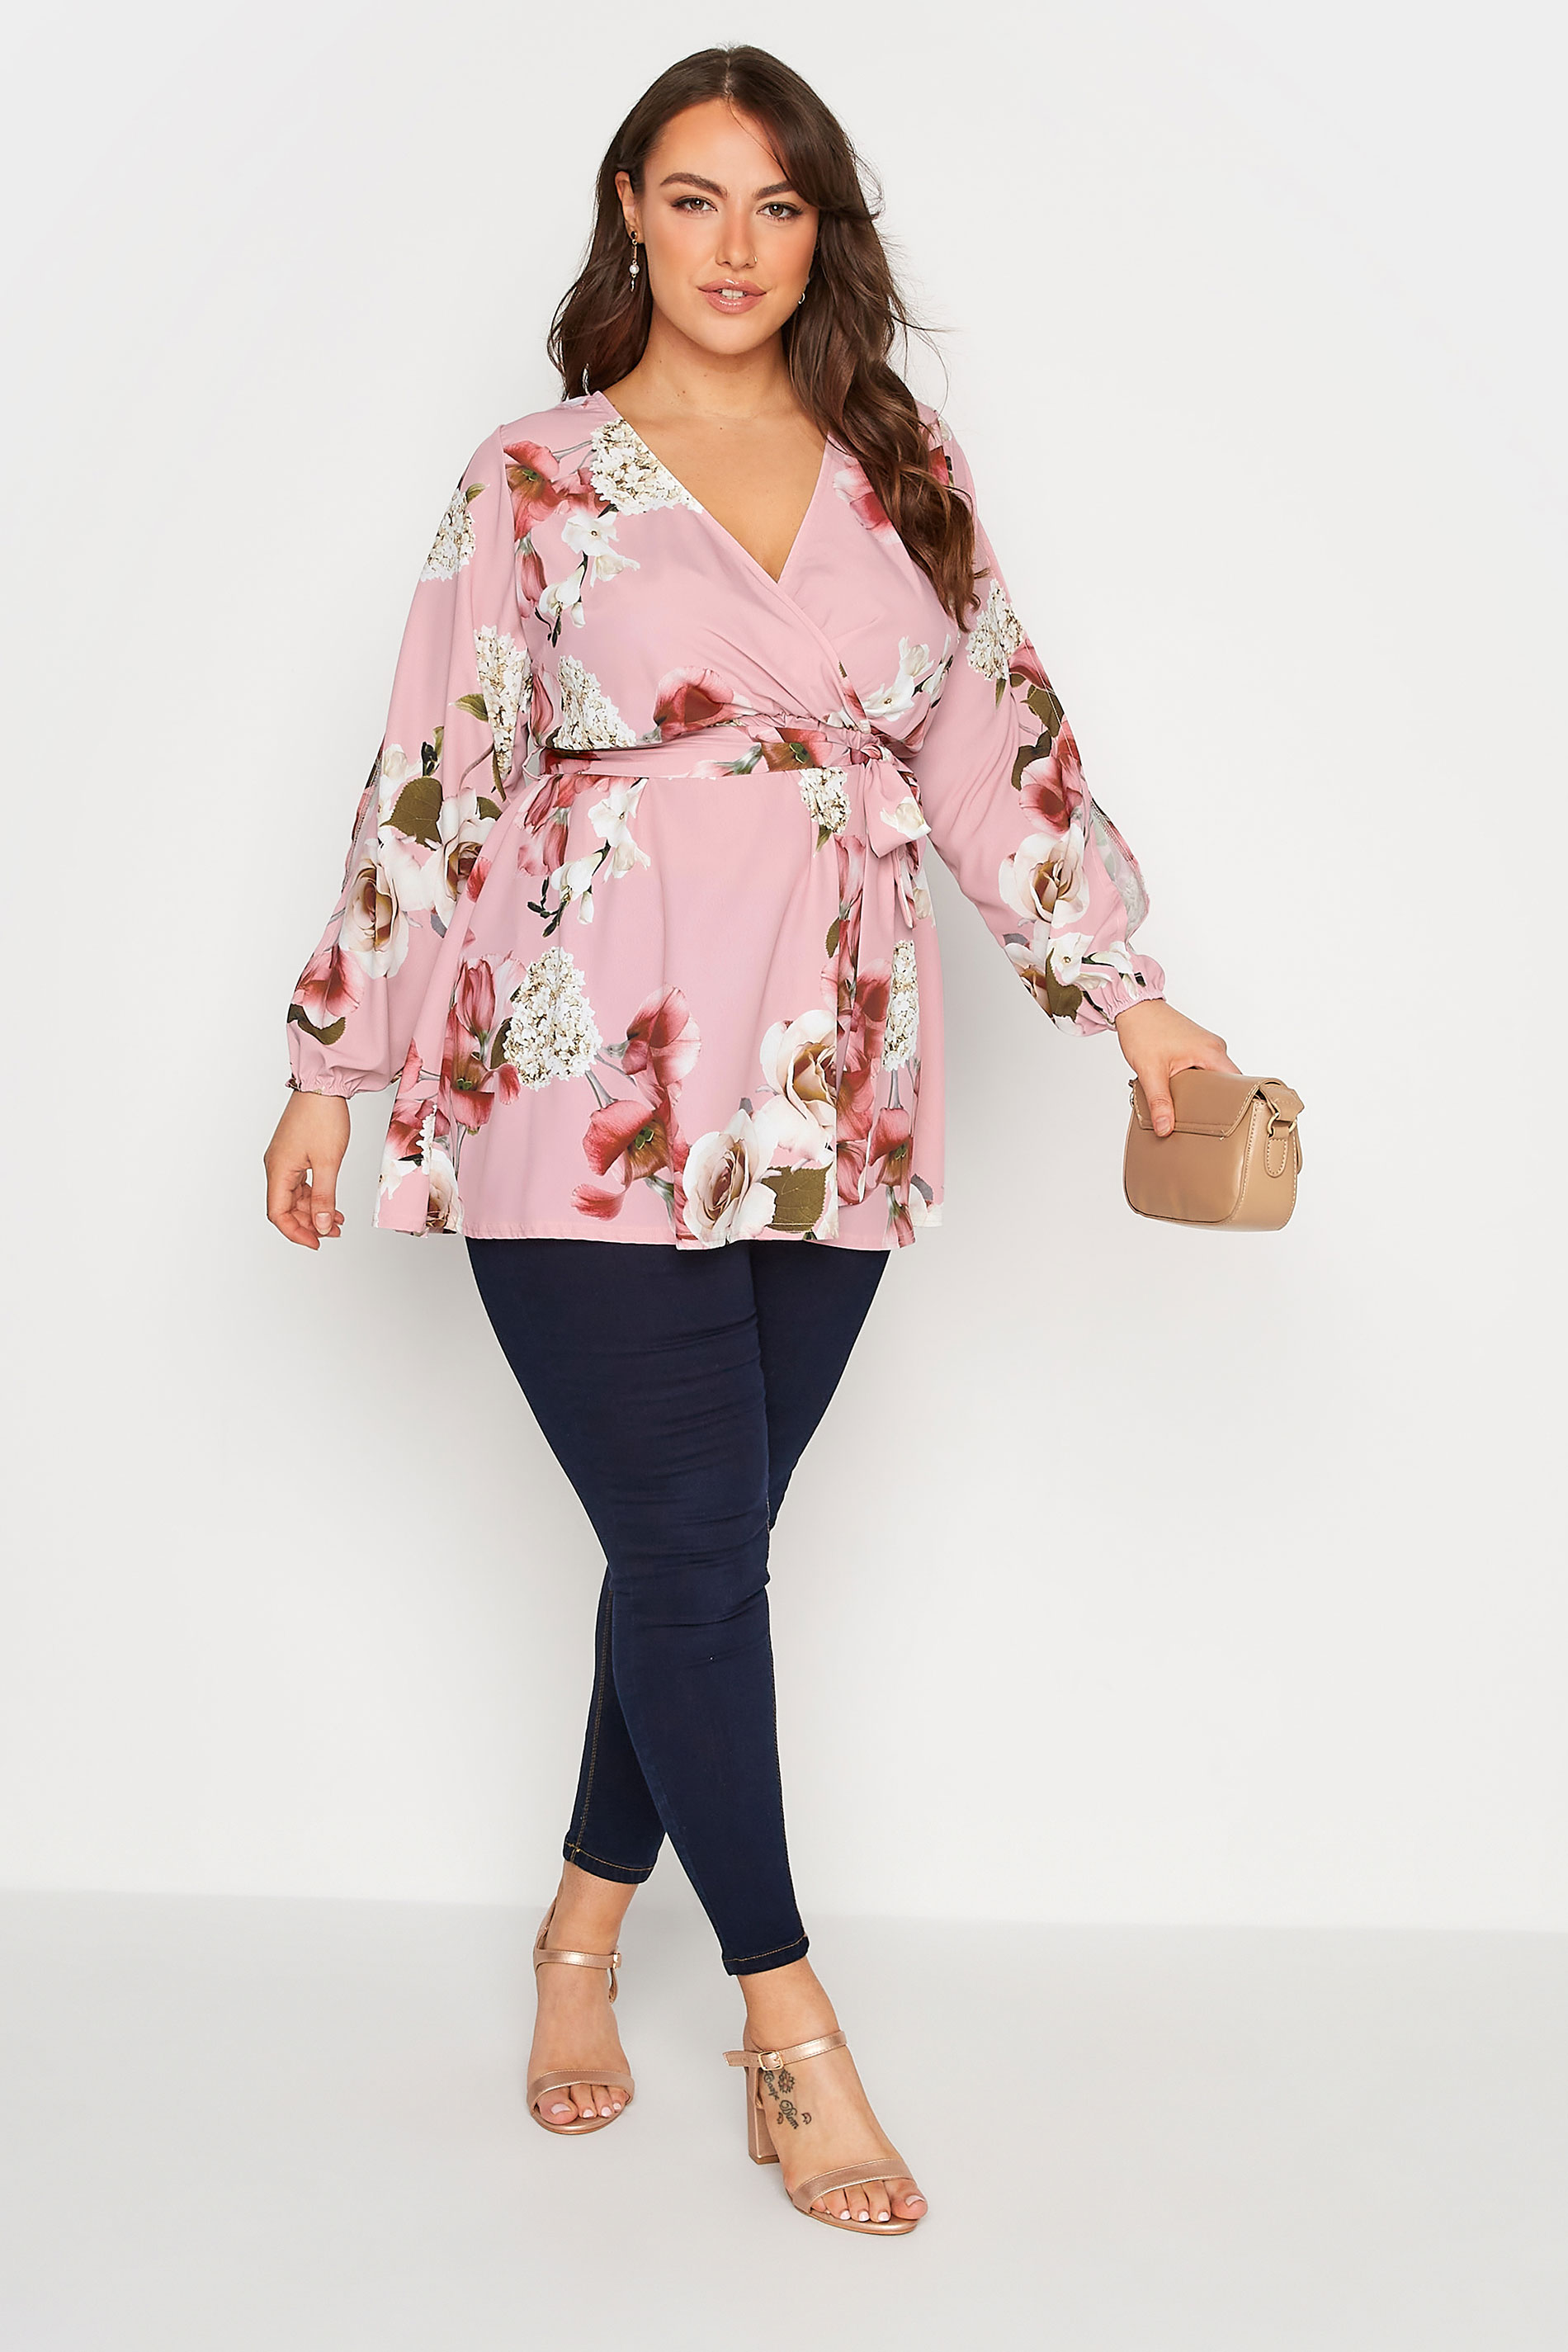 Grande taille  Tops Grande taille  Tops cache-coeur | YOURS LONDON - Top Rose Pastel Cache-Coeur Floral - CV21154